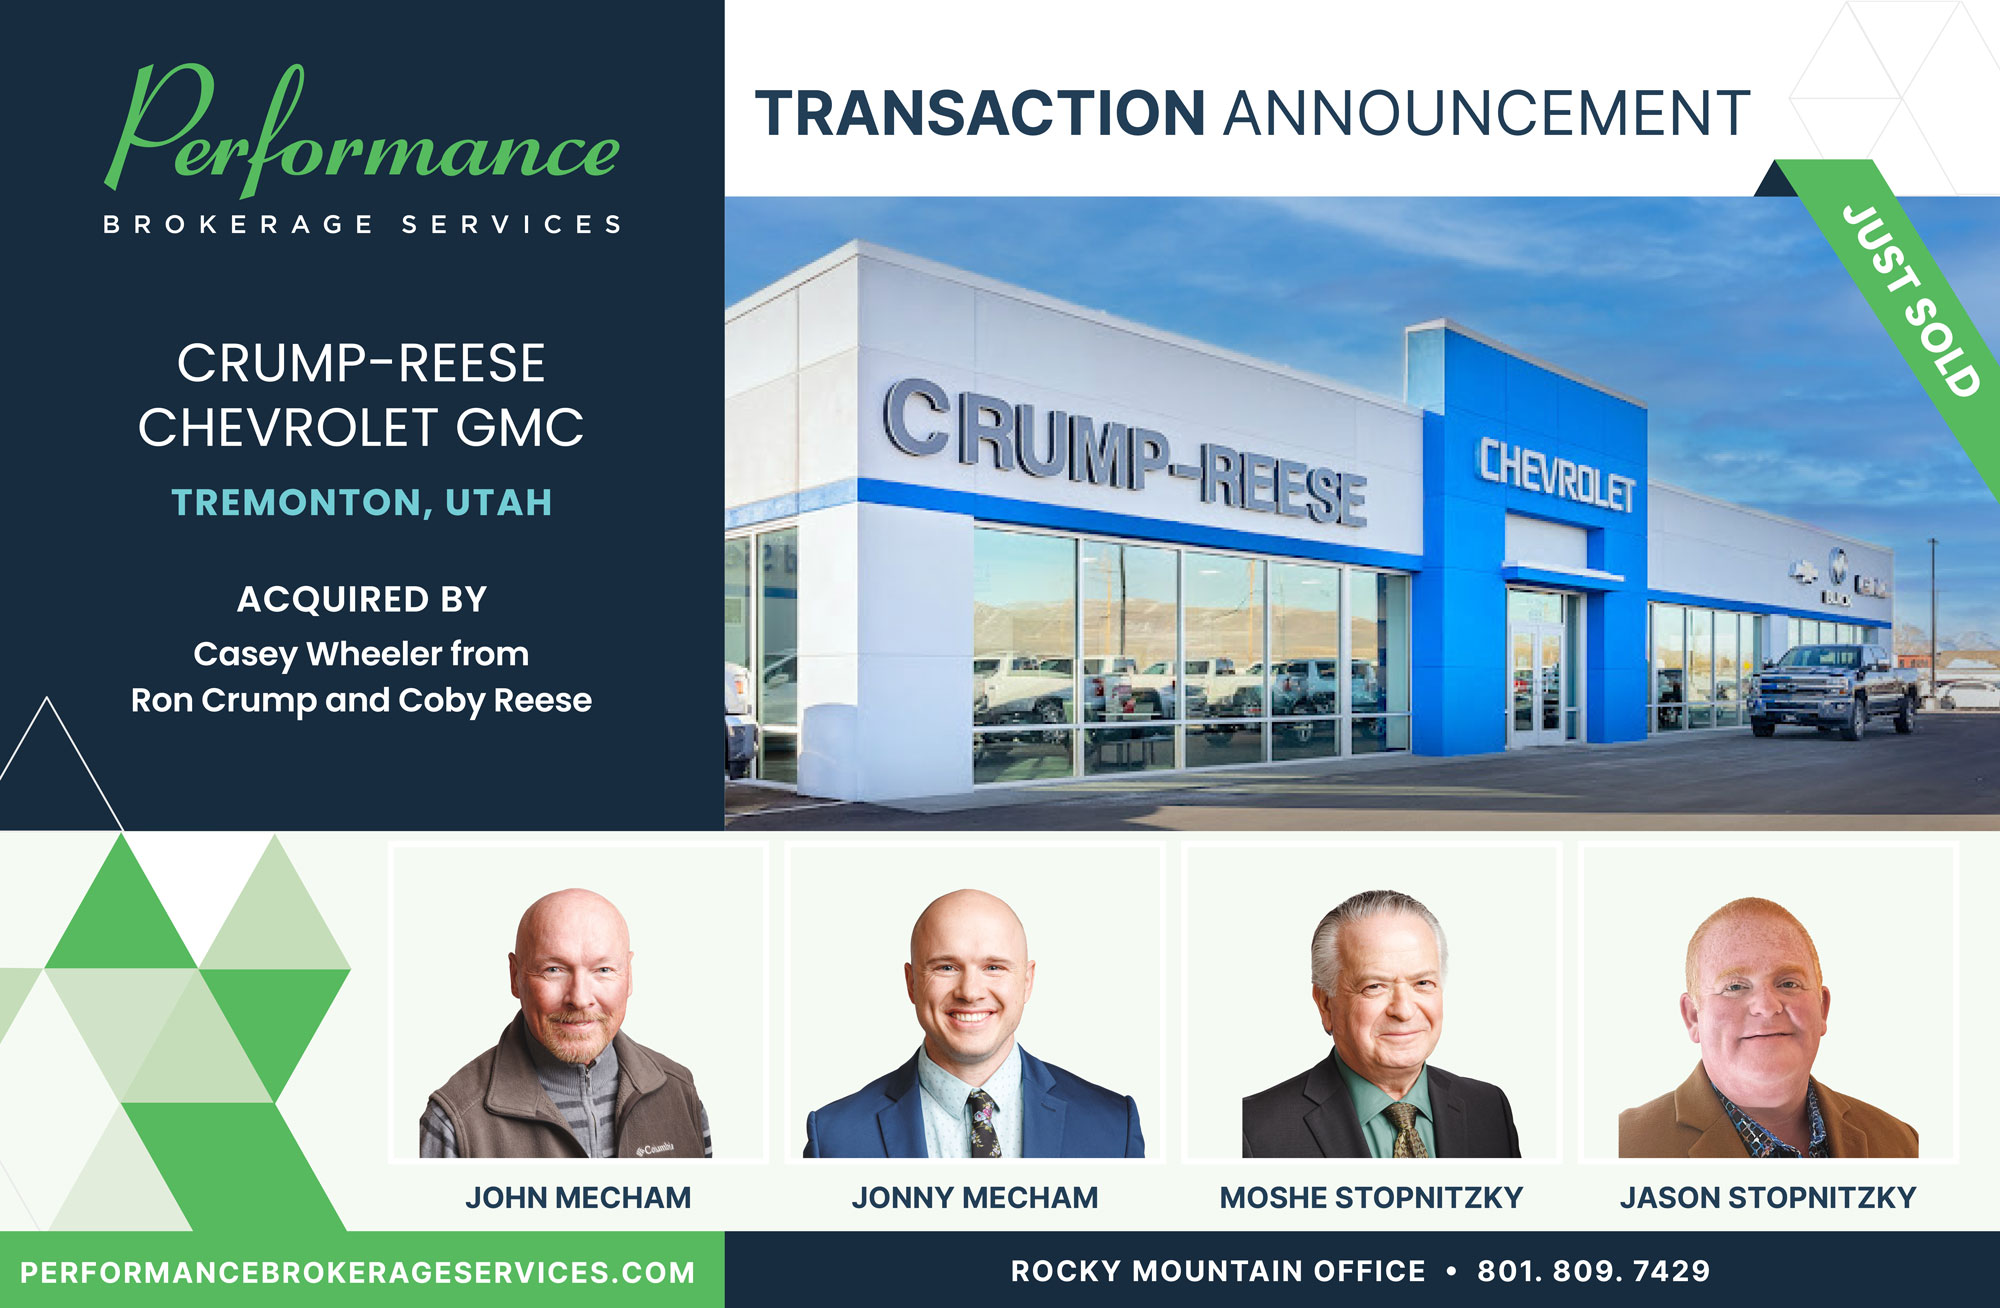 Crump Reese Chevrolet GMC sells to Casey Wheeler with Performance Brokerage